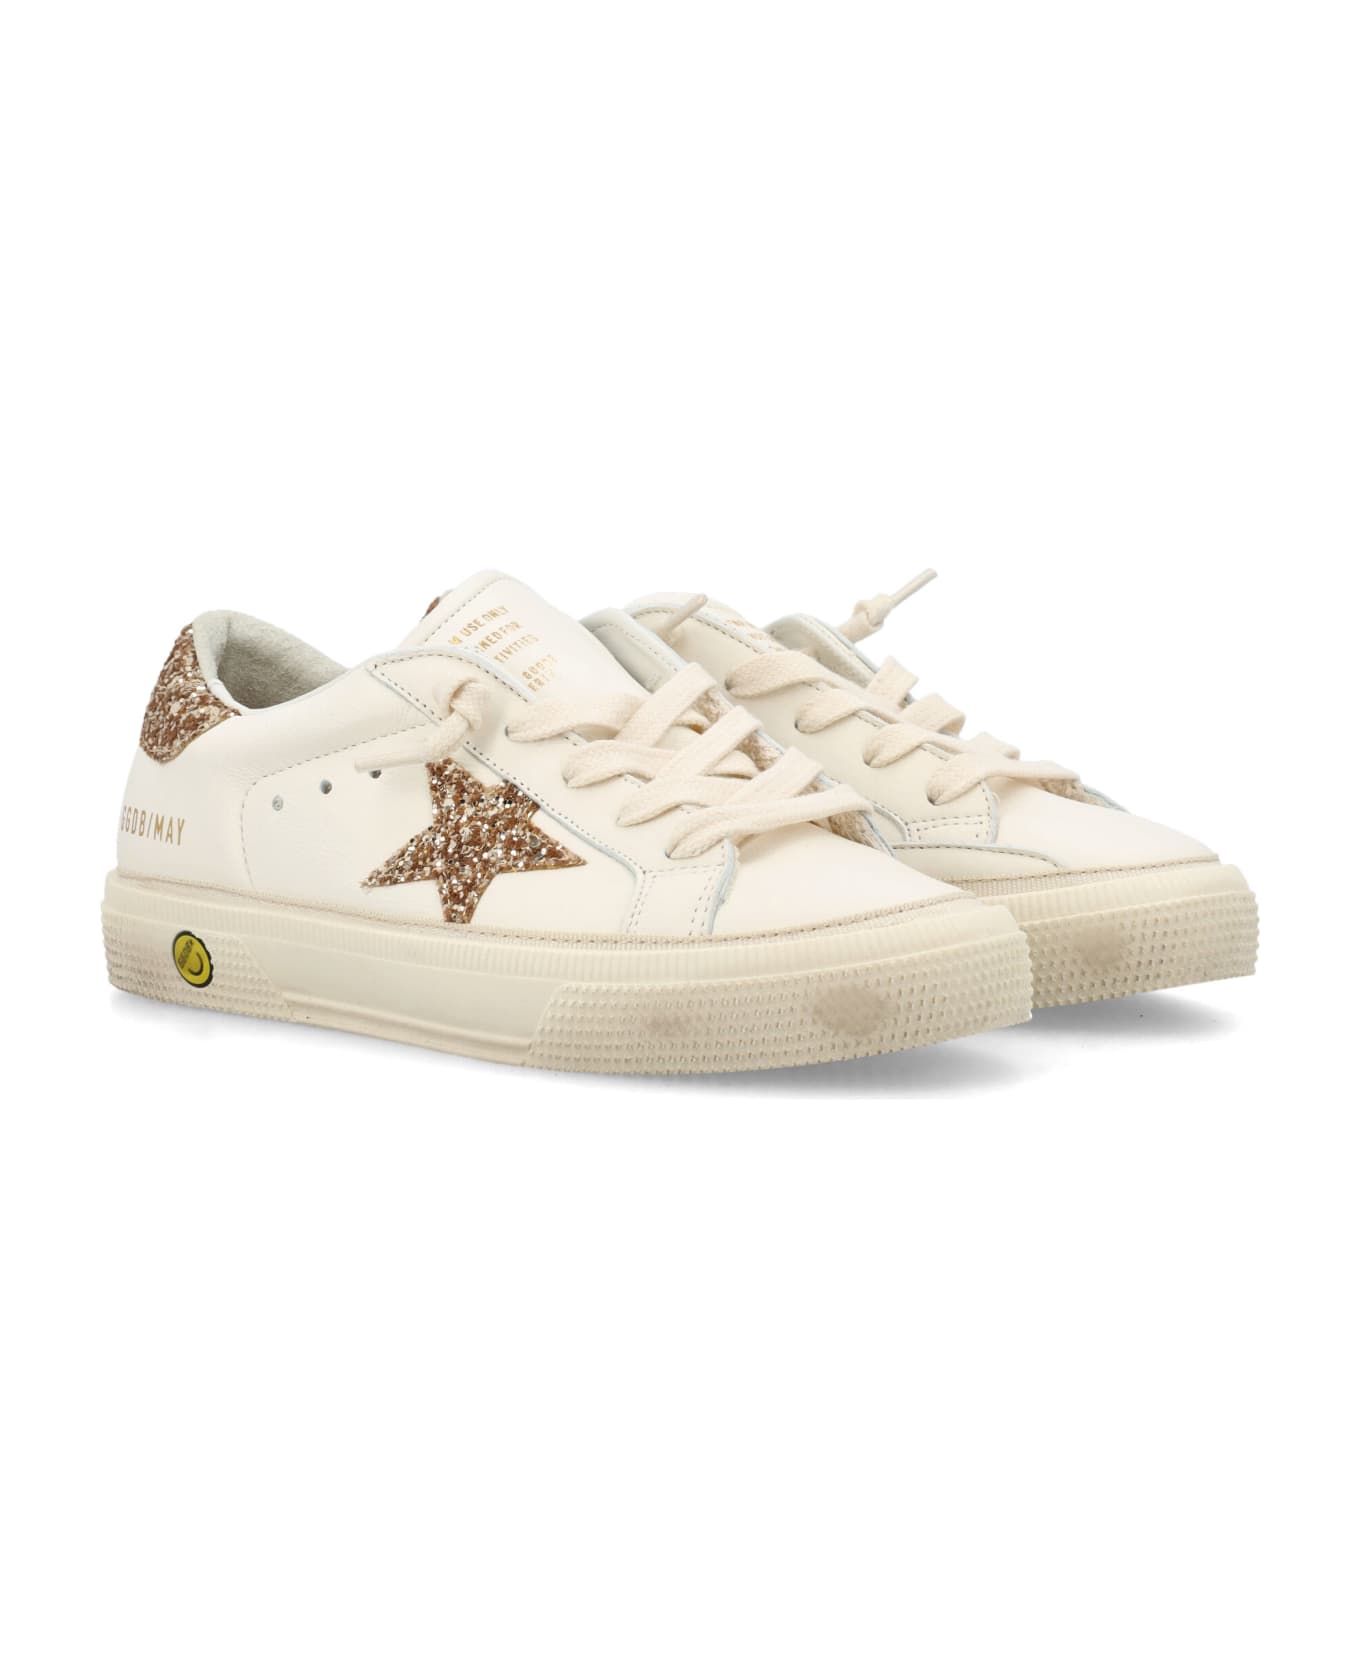 Golden Goose May Sneakers - WHITE/GOLD